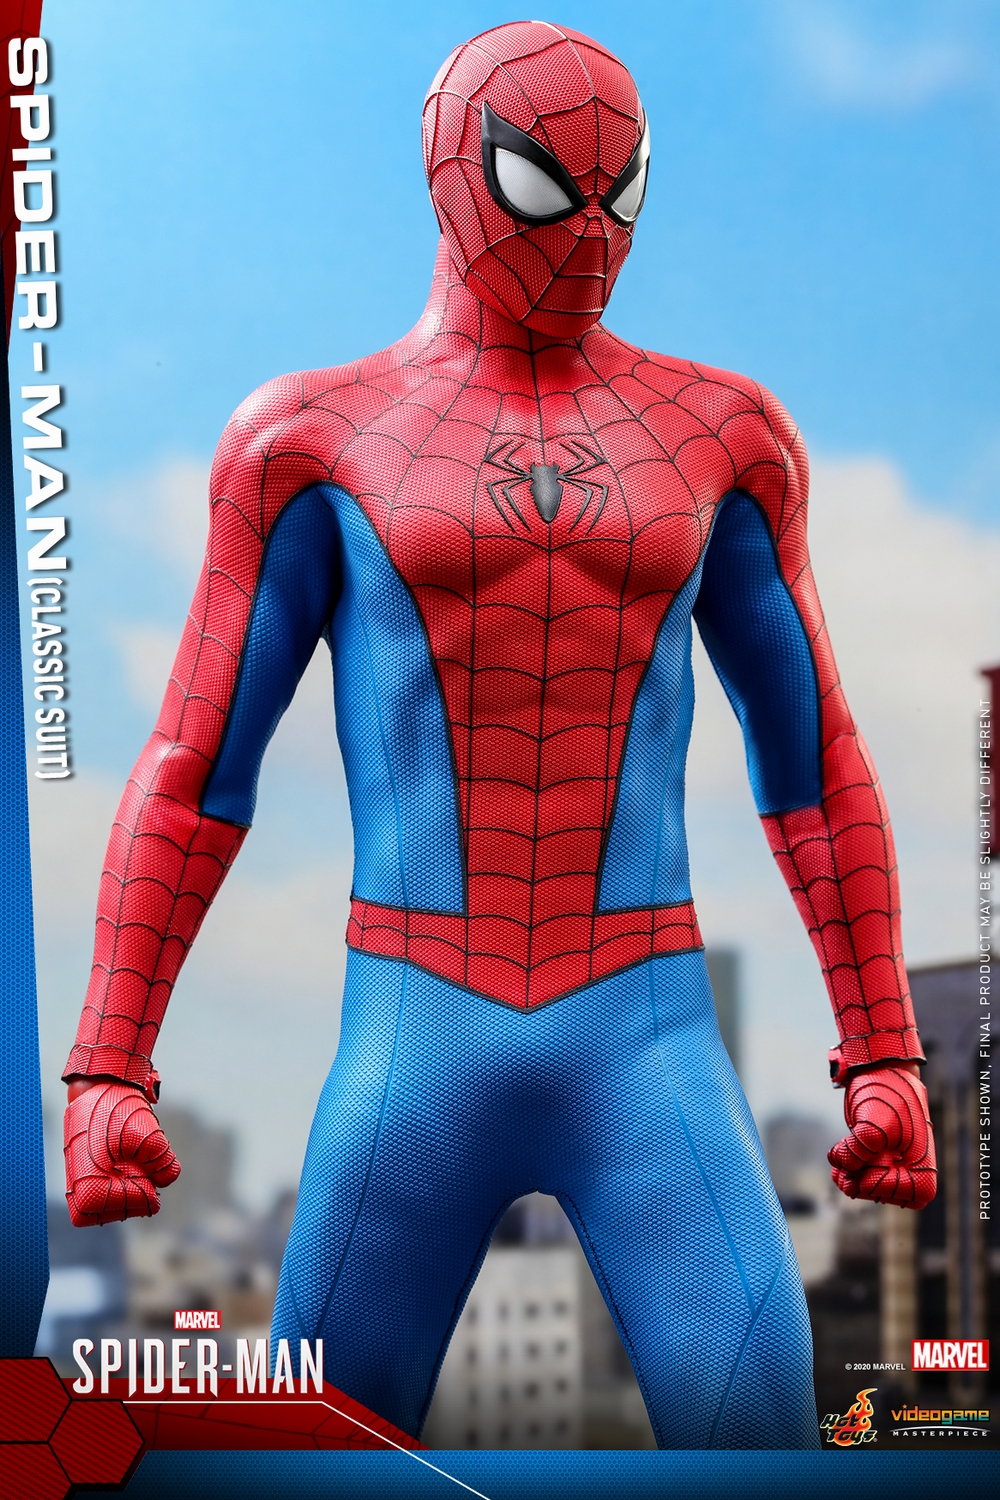 Hot Toys - MSM - Spider-Man (Classic Suit) collectible figure_PR11.jpg